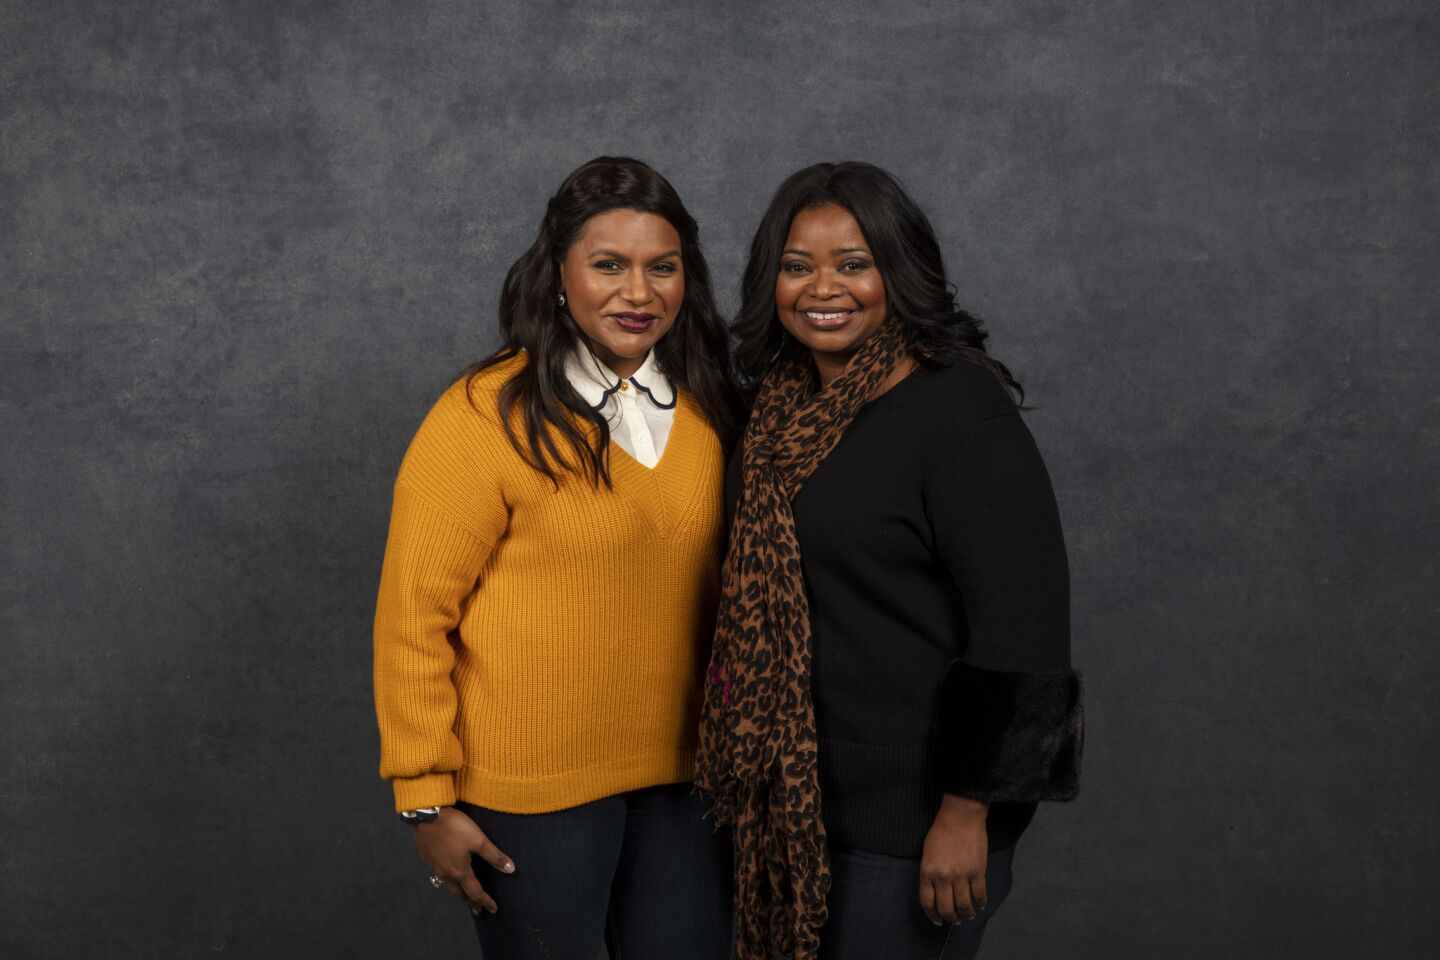 Mindy Kaling, left, from the film "Late Night" and Octavia Spencer from the film "Luce" at the L.A. Times Photo and Video Studio at the 2019 Sundance Film Festival in Park City, Utah.